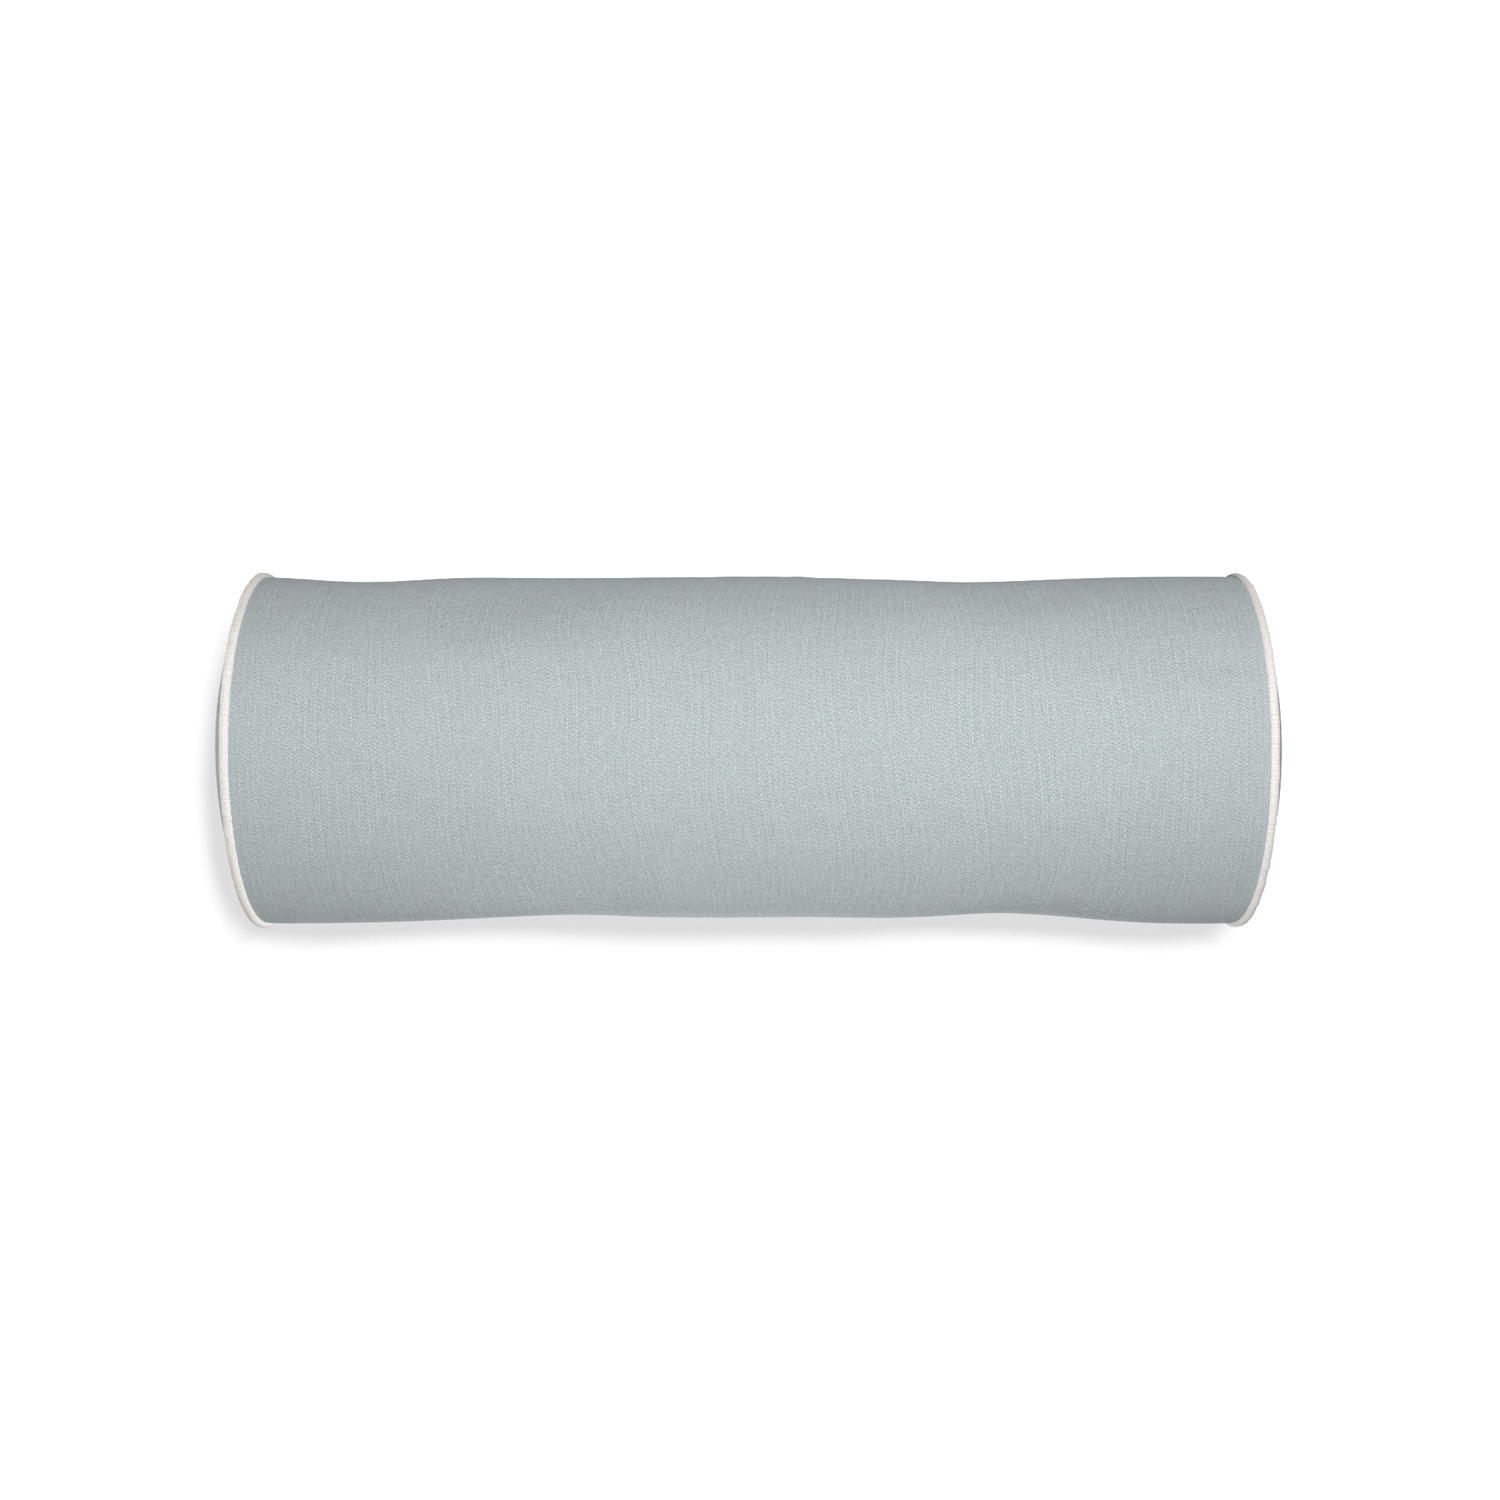 Bolster sea custom grey bluepillow with snow piping on white background